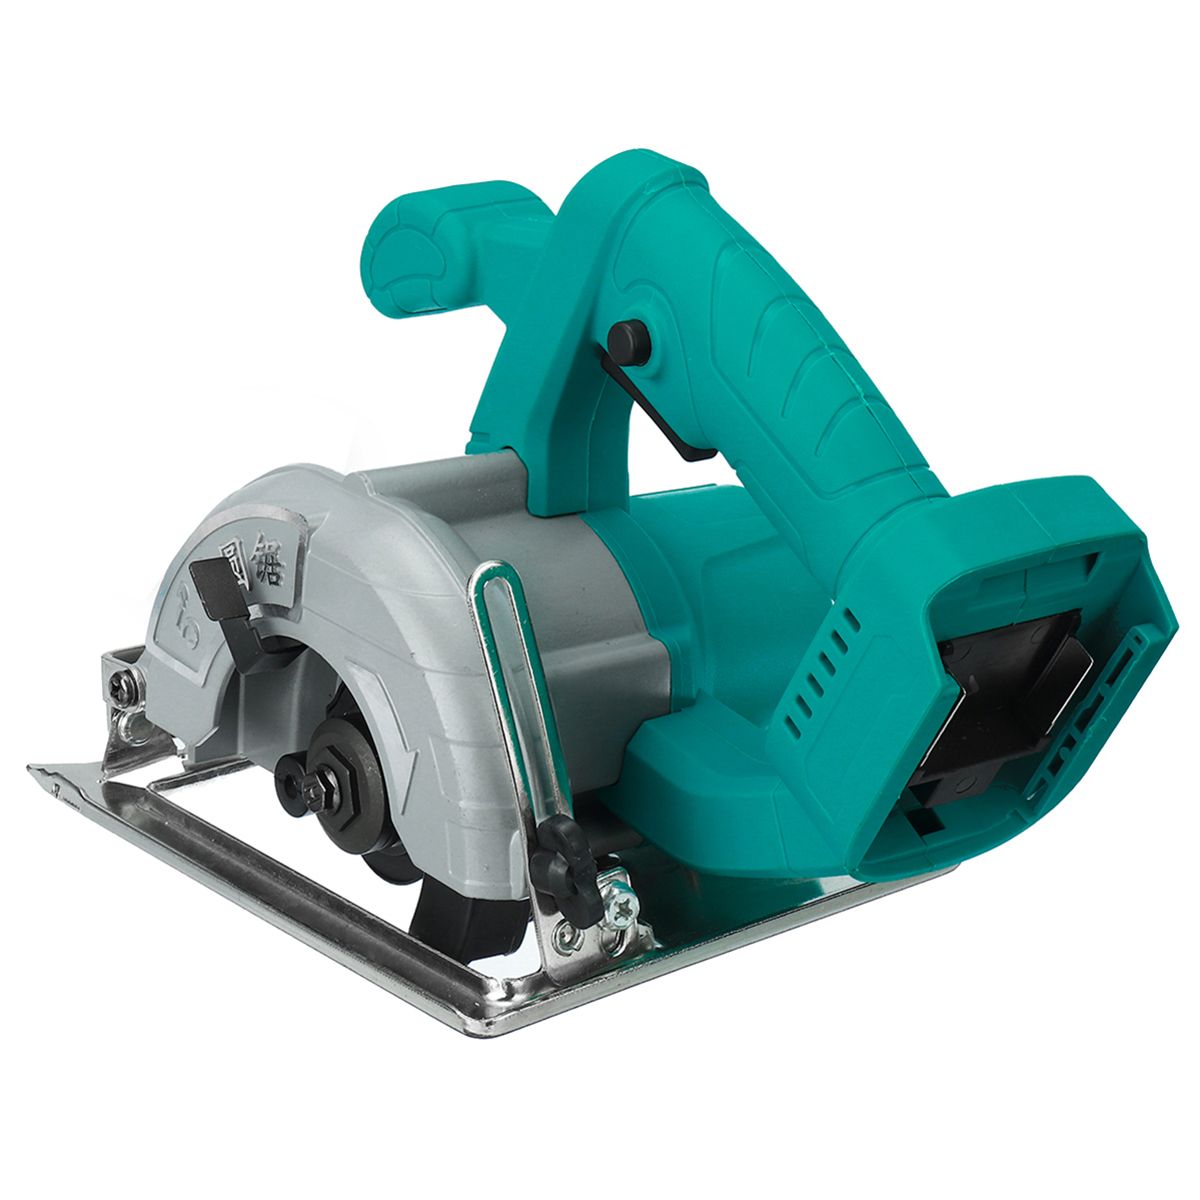 18V-Portable-Brushless-Electric-Circular-Saw-Cutting-Machine-Woodworking-Circular-Saw-Suitable-For-M-1726848